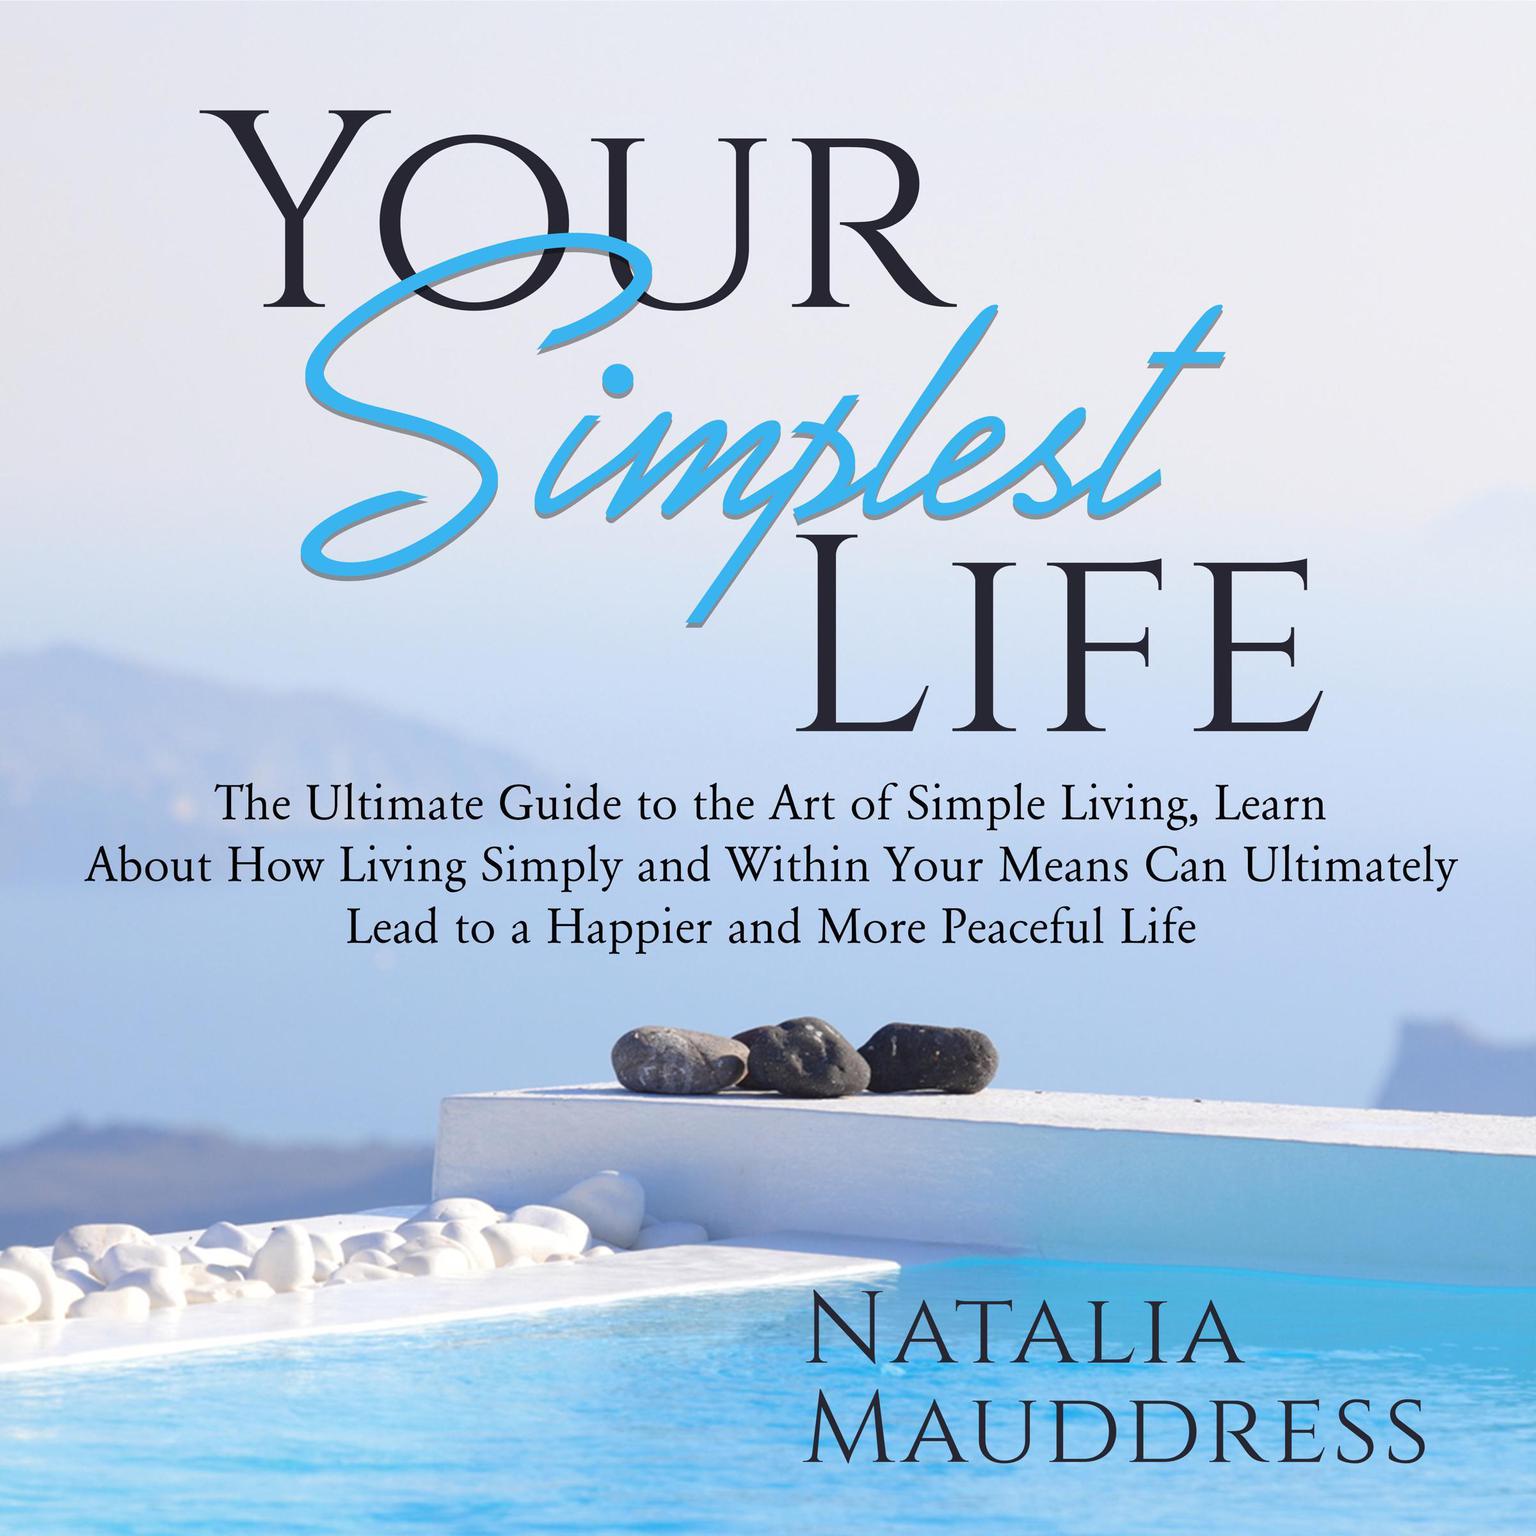 Your Simplest Life: The Ultimate Guide to the Art of Simple Living, Learn About How Living Simply and Within Your Means Can Ultimately Lead to a Happy and Peaceful Life Audiobook, by Natalia Mauddress